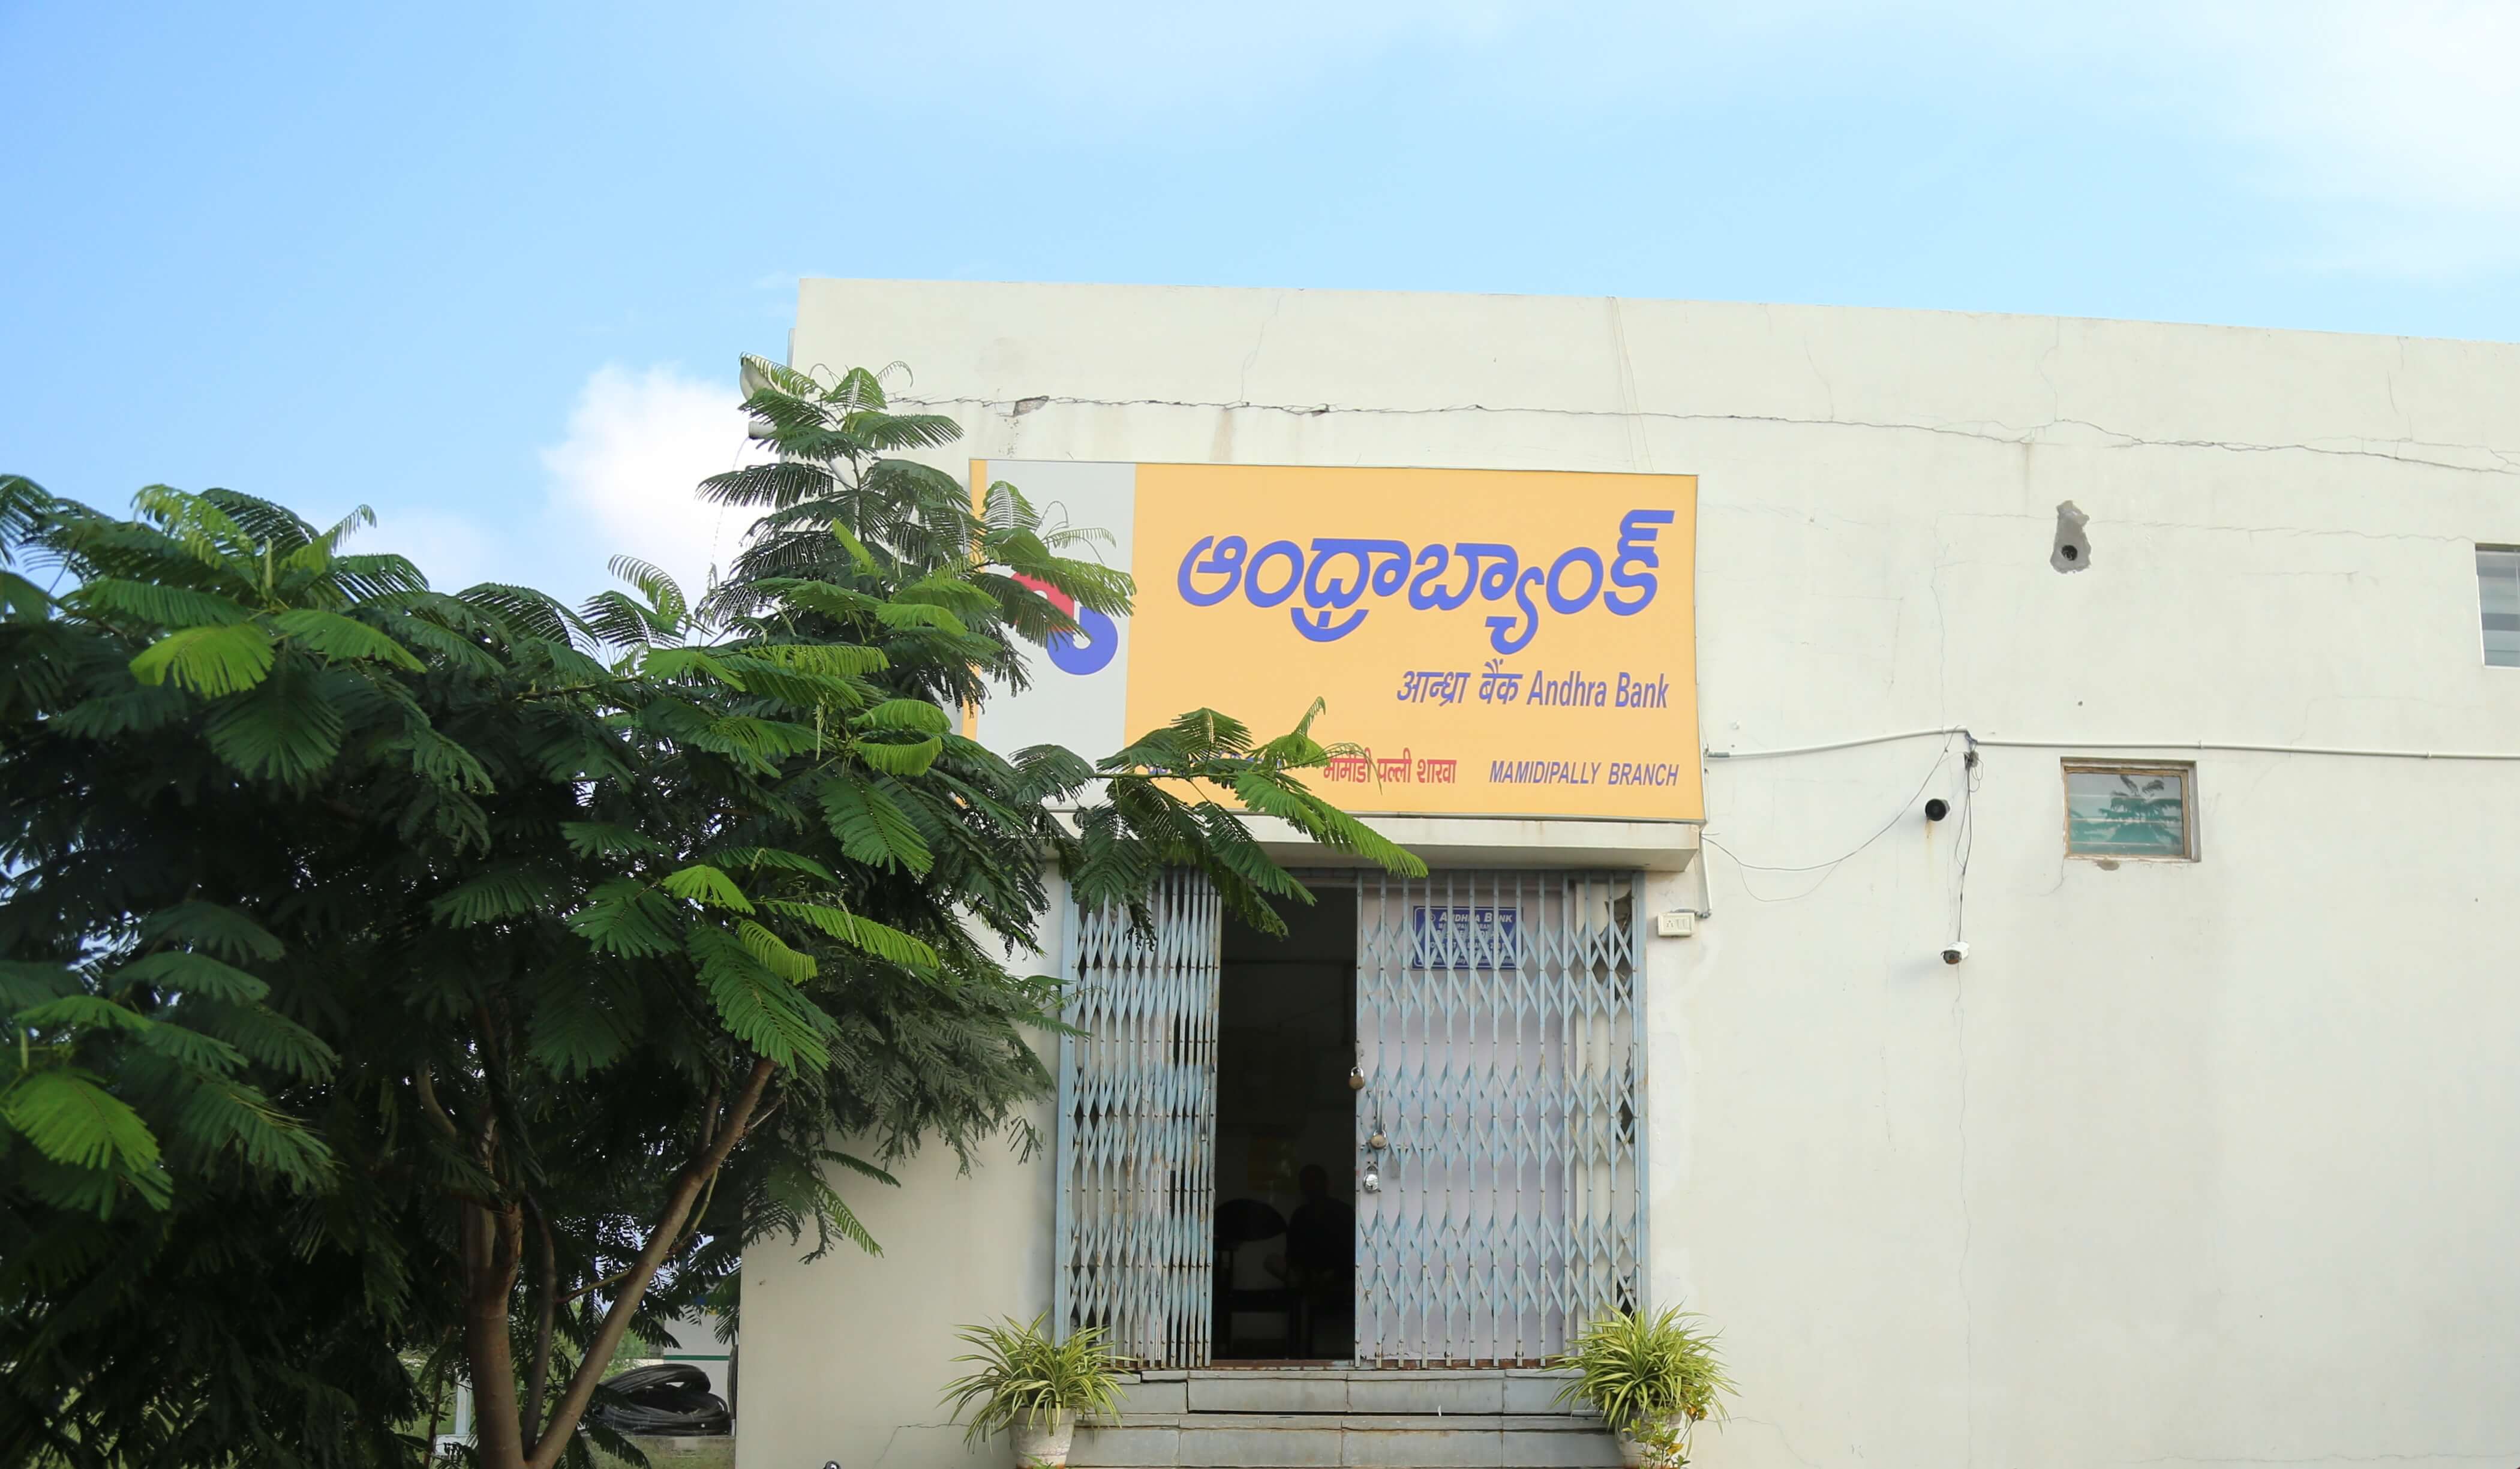 Branch of Andhra Bank